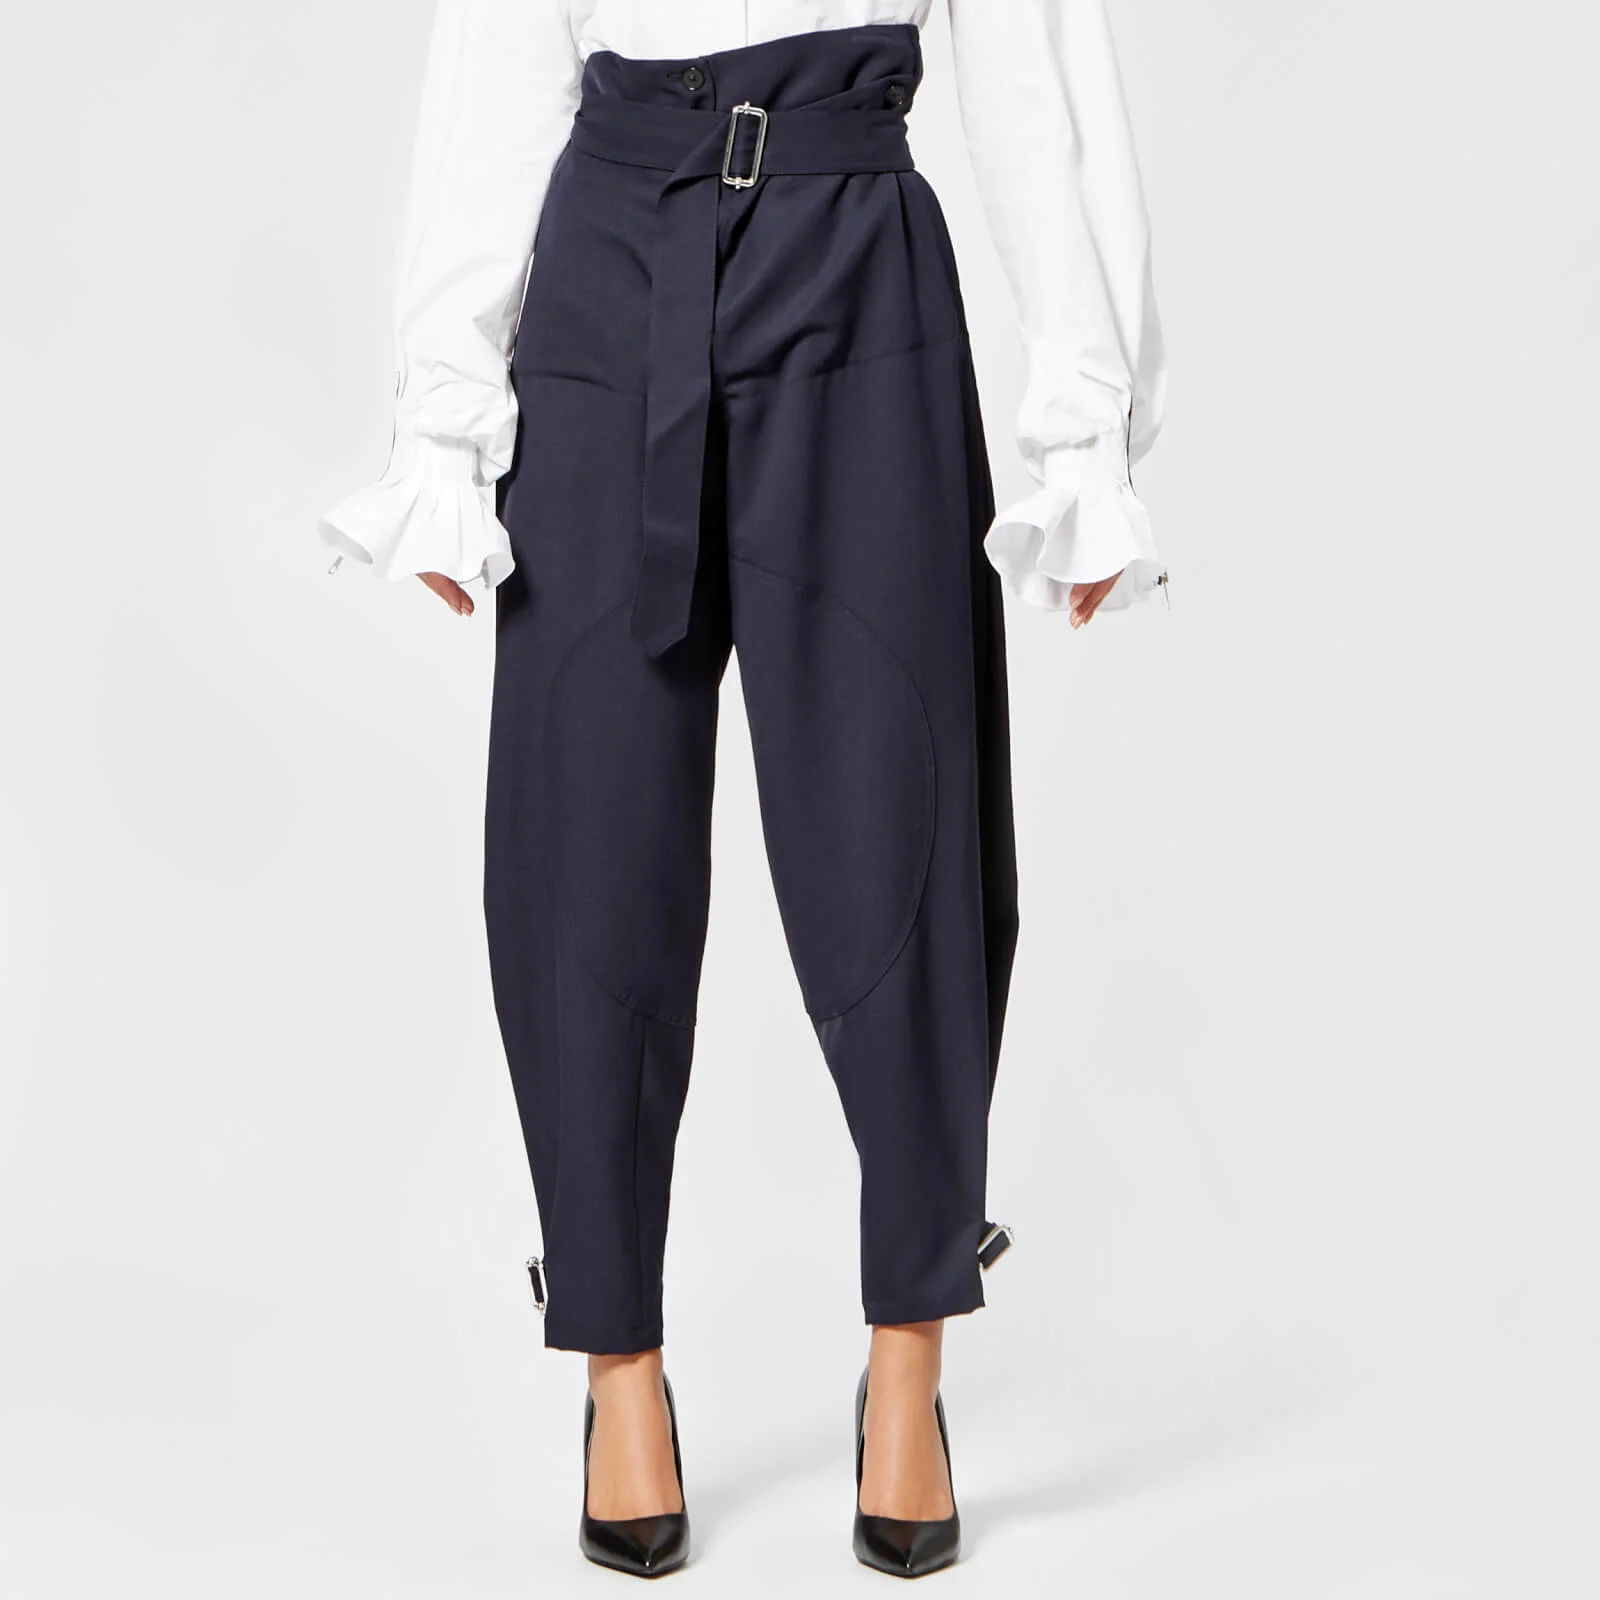 JW Anderson Women's Fold Front Utility Trousers - Navy Image 1